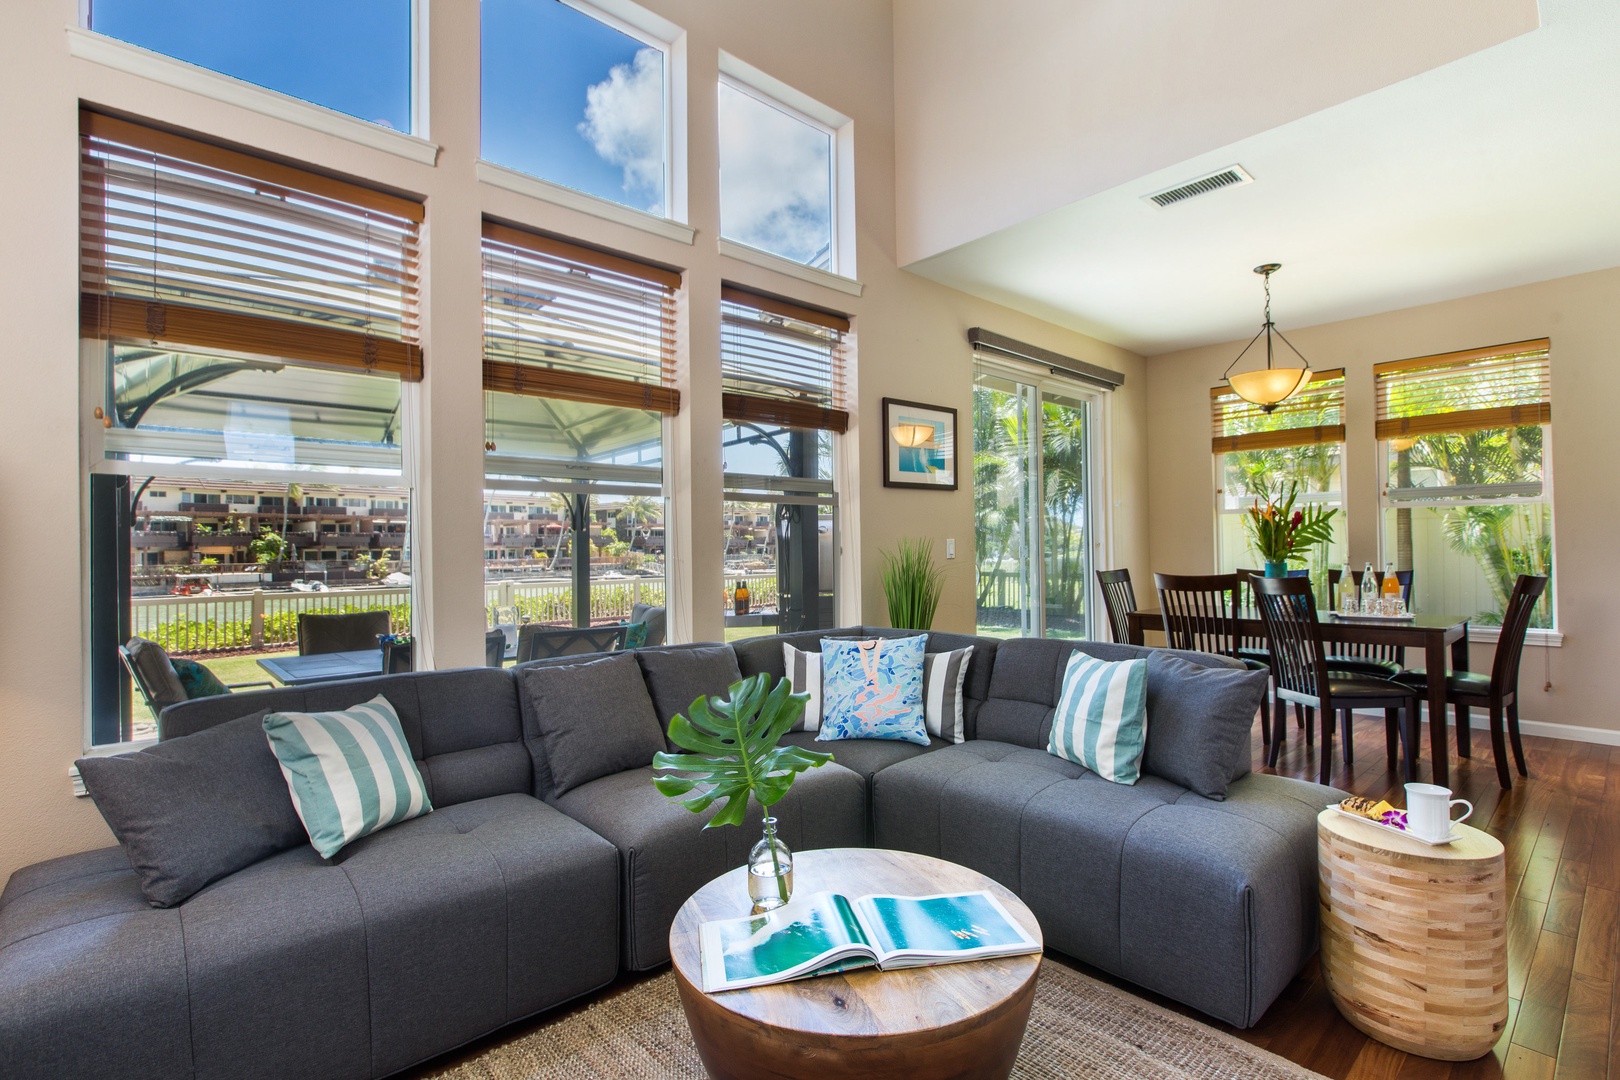 Honolulu Vacation Rentals, Ohana Kai - Your contemporary island hale awaits! As you enter, you are greeted by a stylish and cozy living and dining room with marina views.